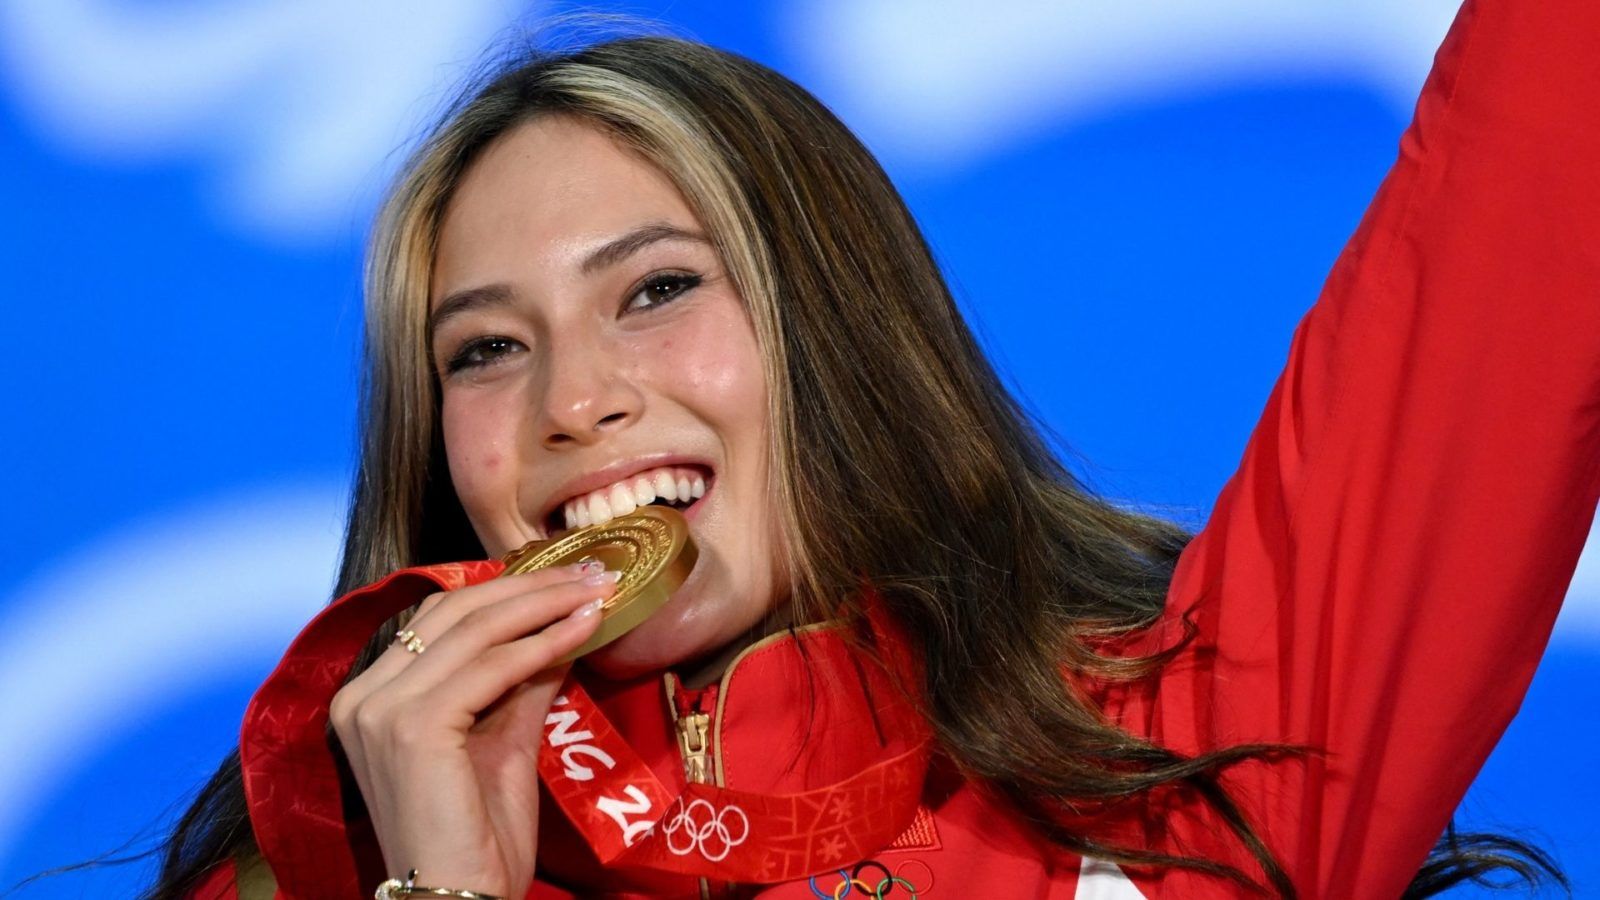 All the gold medals won at the 2022 Beijing Winter Olympics